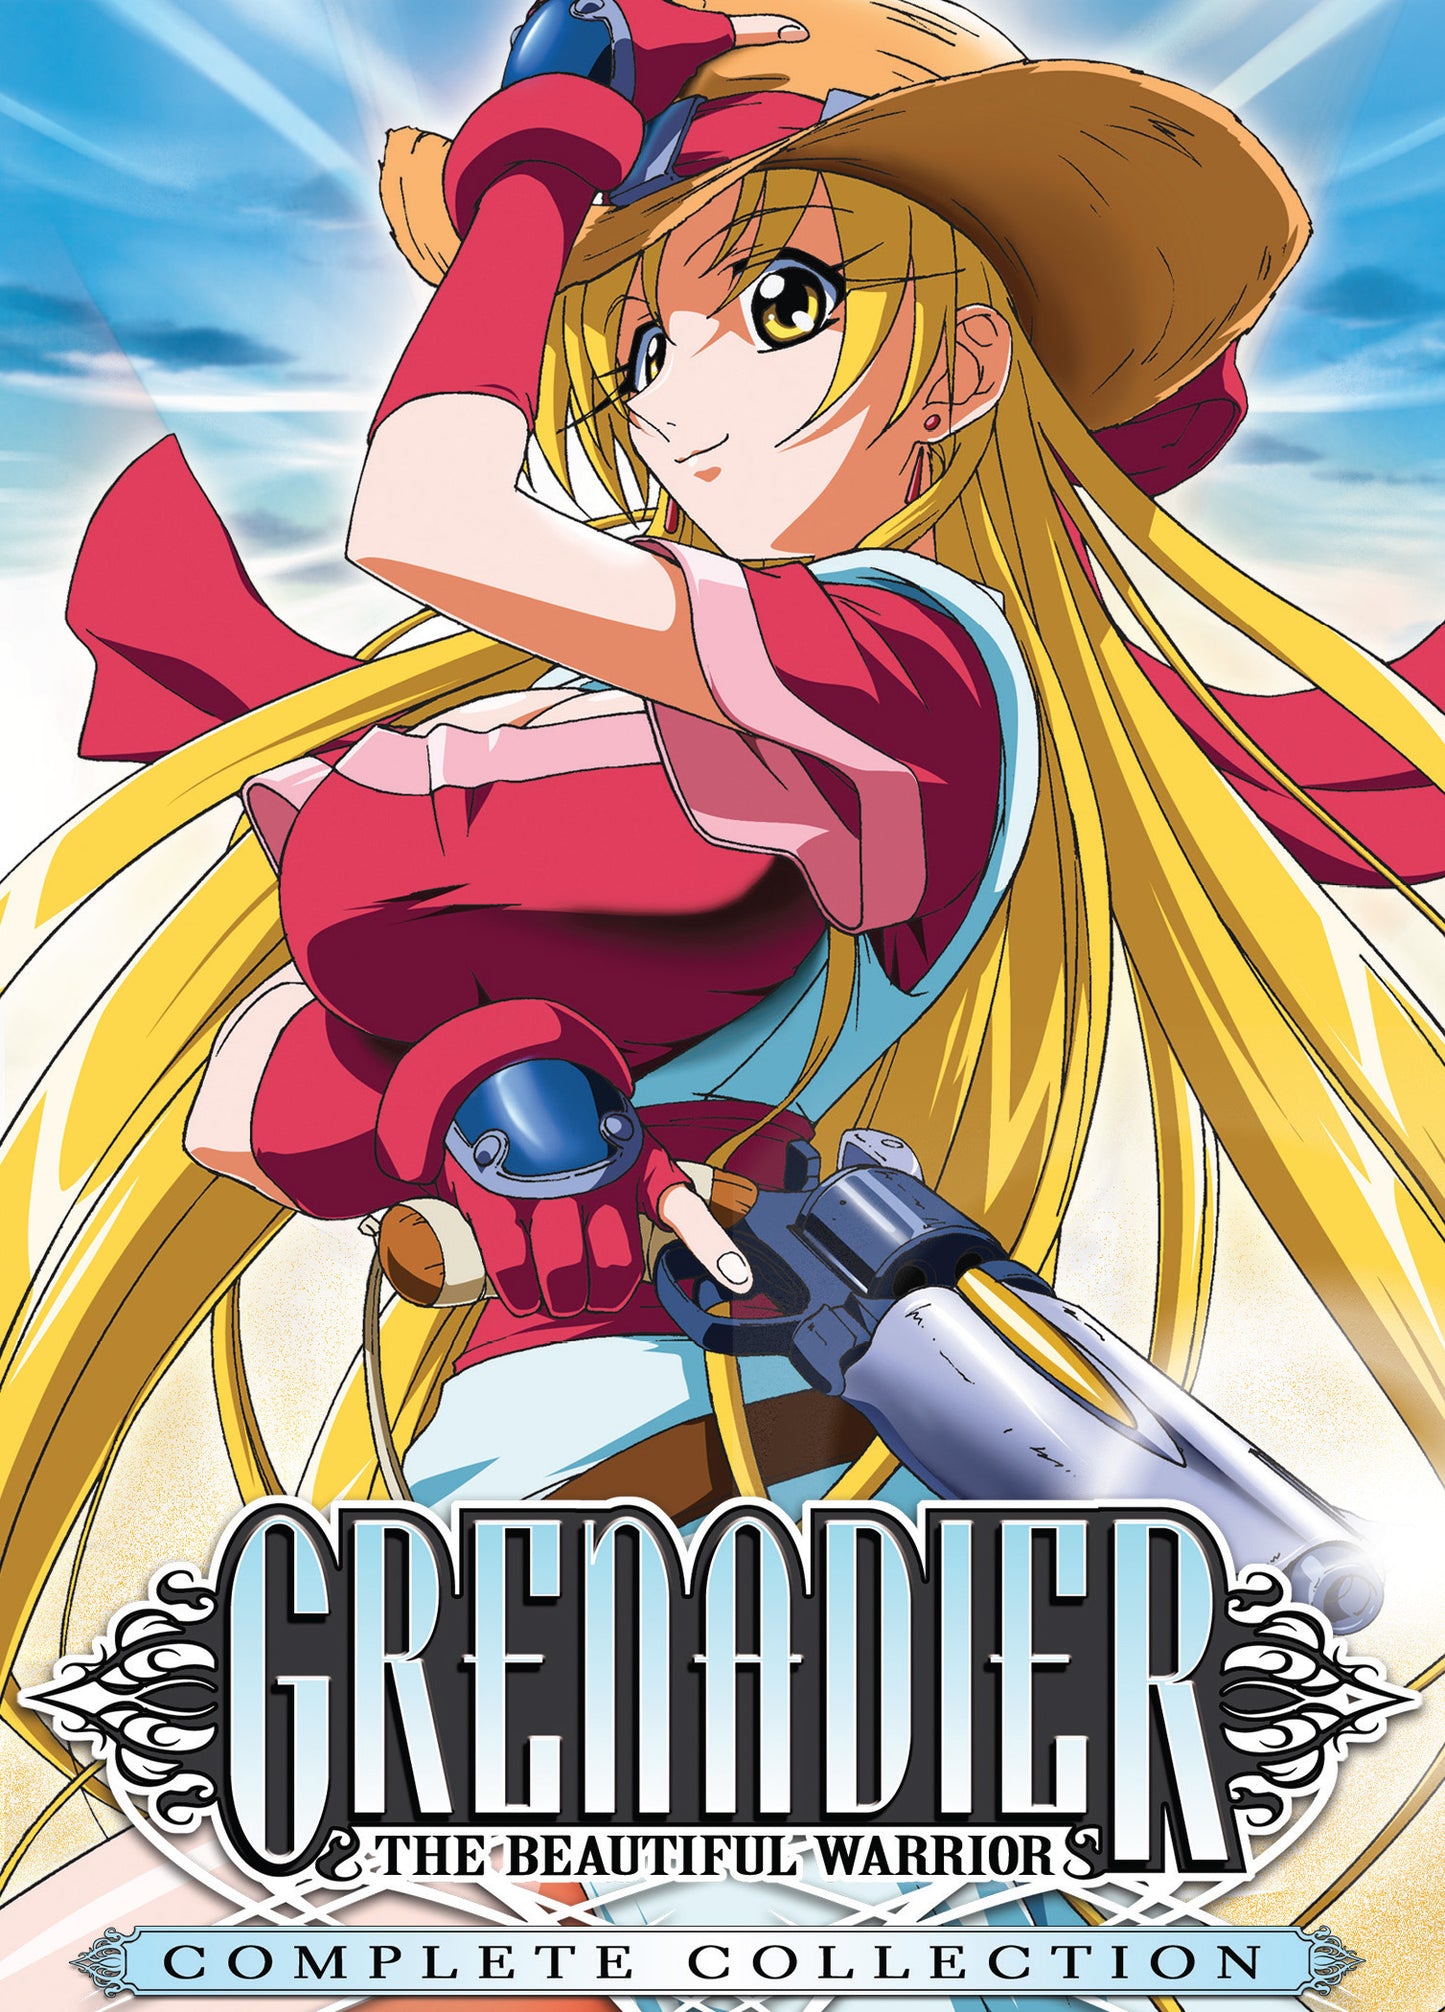 Grenadier - The Beautiful Warrior Complete Collection [DVD]